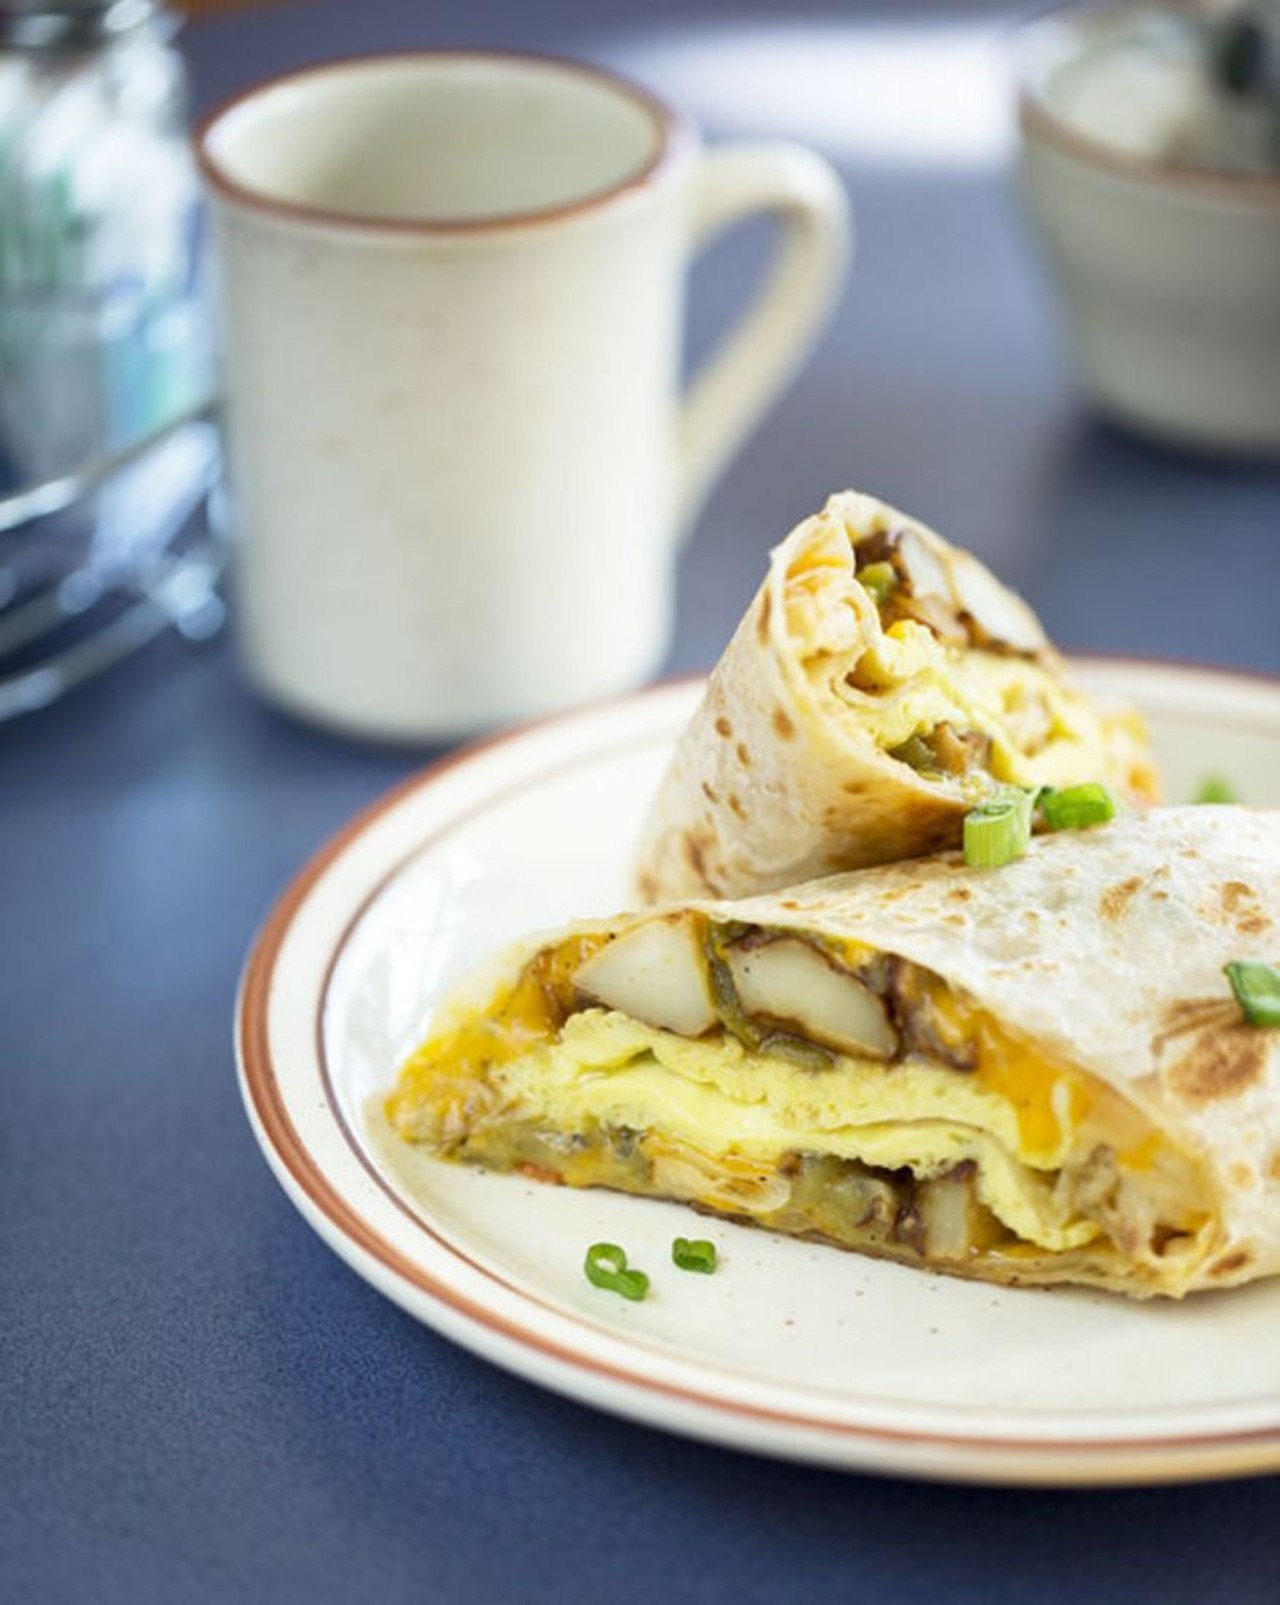 We also recommend Southwest Diner's New Mexican Breakfast Burrito, a flour tortilla stuffed with scrambled eggs, green chile, cheese and home fries. For some extra flair (and $2 more), add calabacitas, chorizo, ham, sausage, bacon or turkey bacon. You can also get it covered with green or red sauce. If your hungover self can't make decisions, ask for "Christmas," which is half of each sauce. Photo by Jennifer Silverberg.